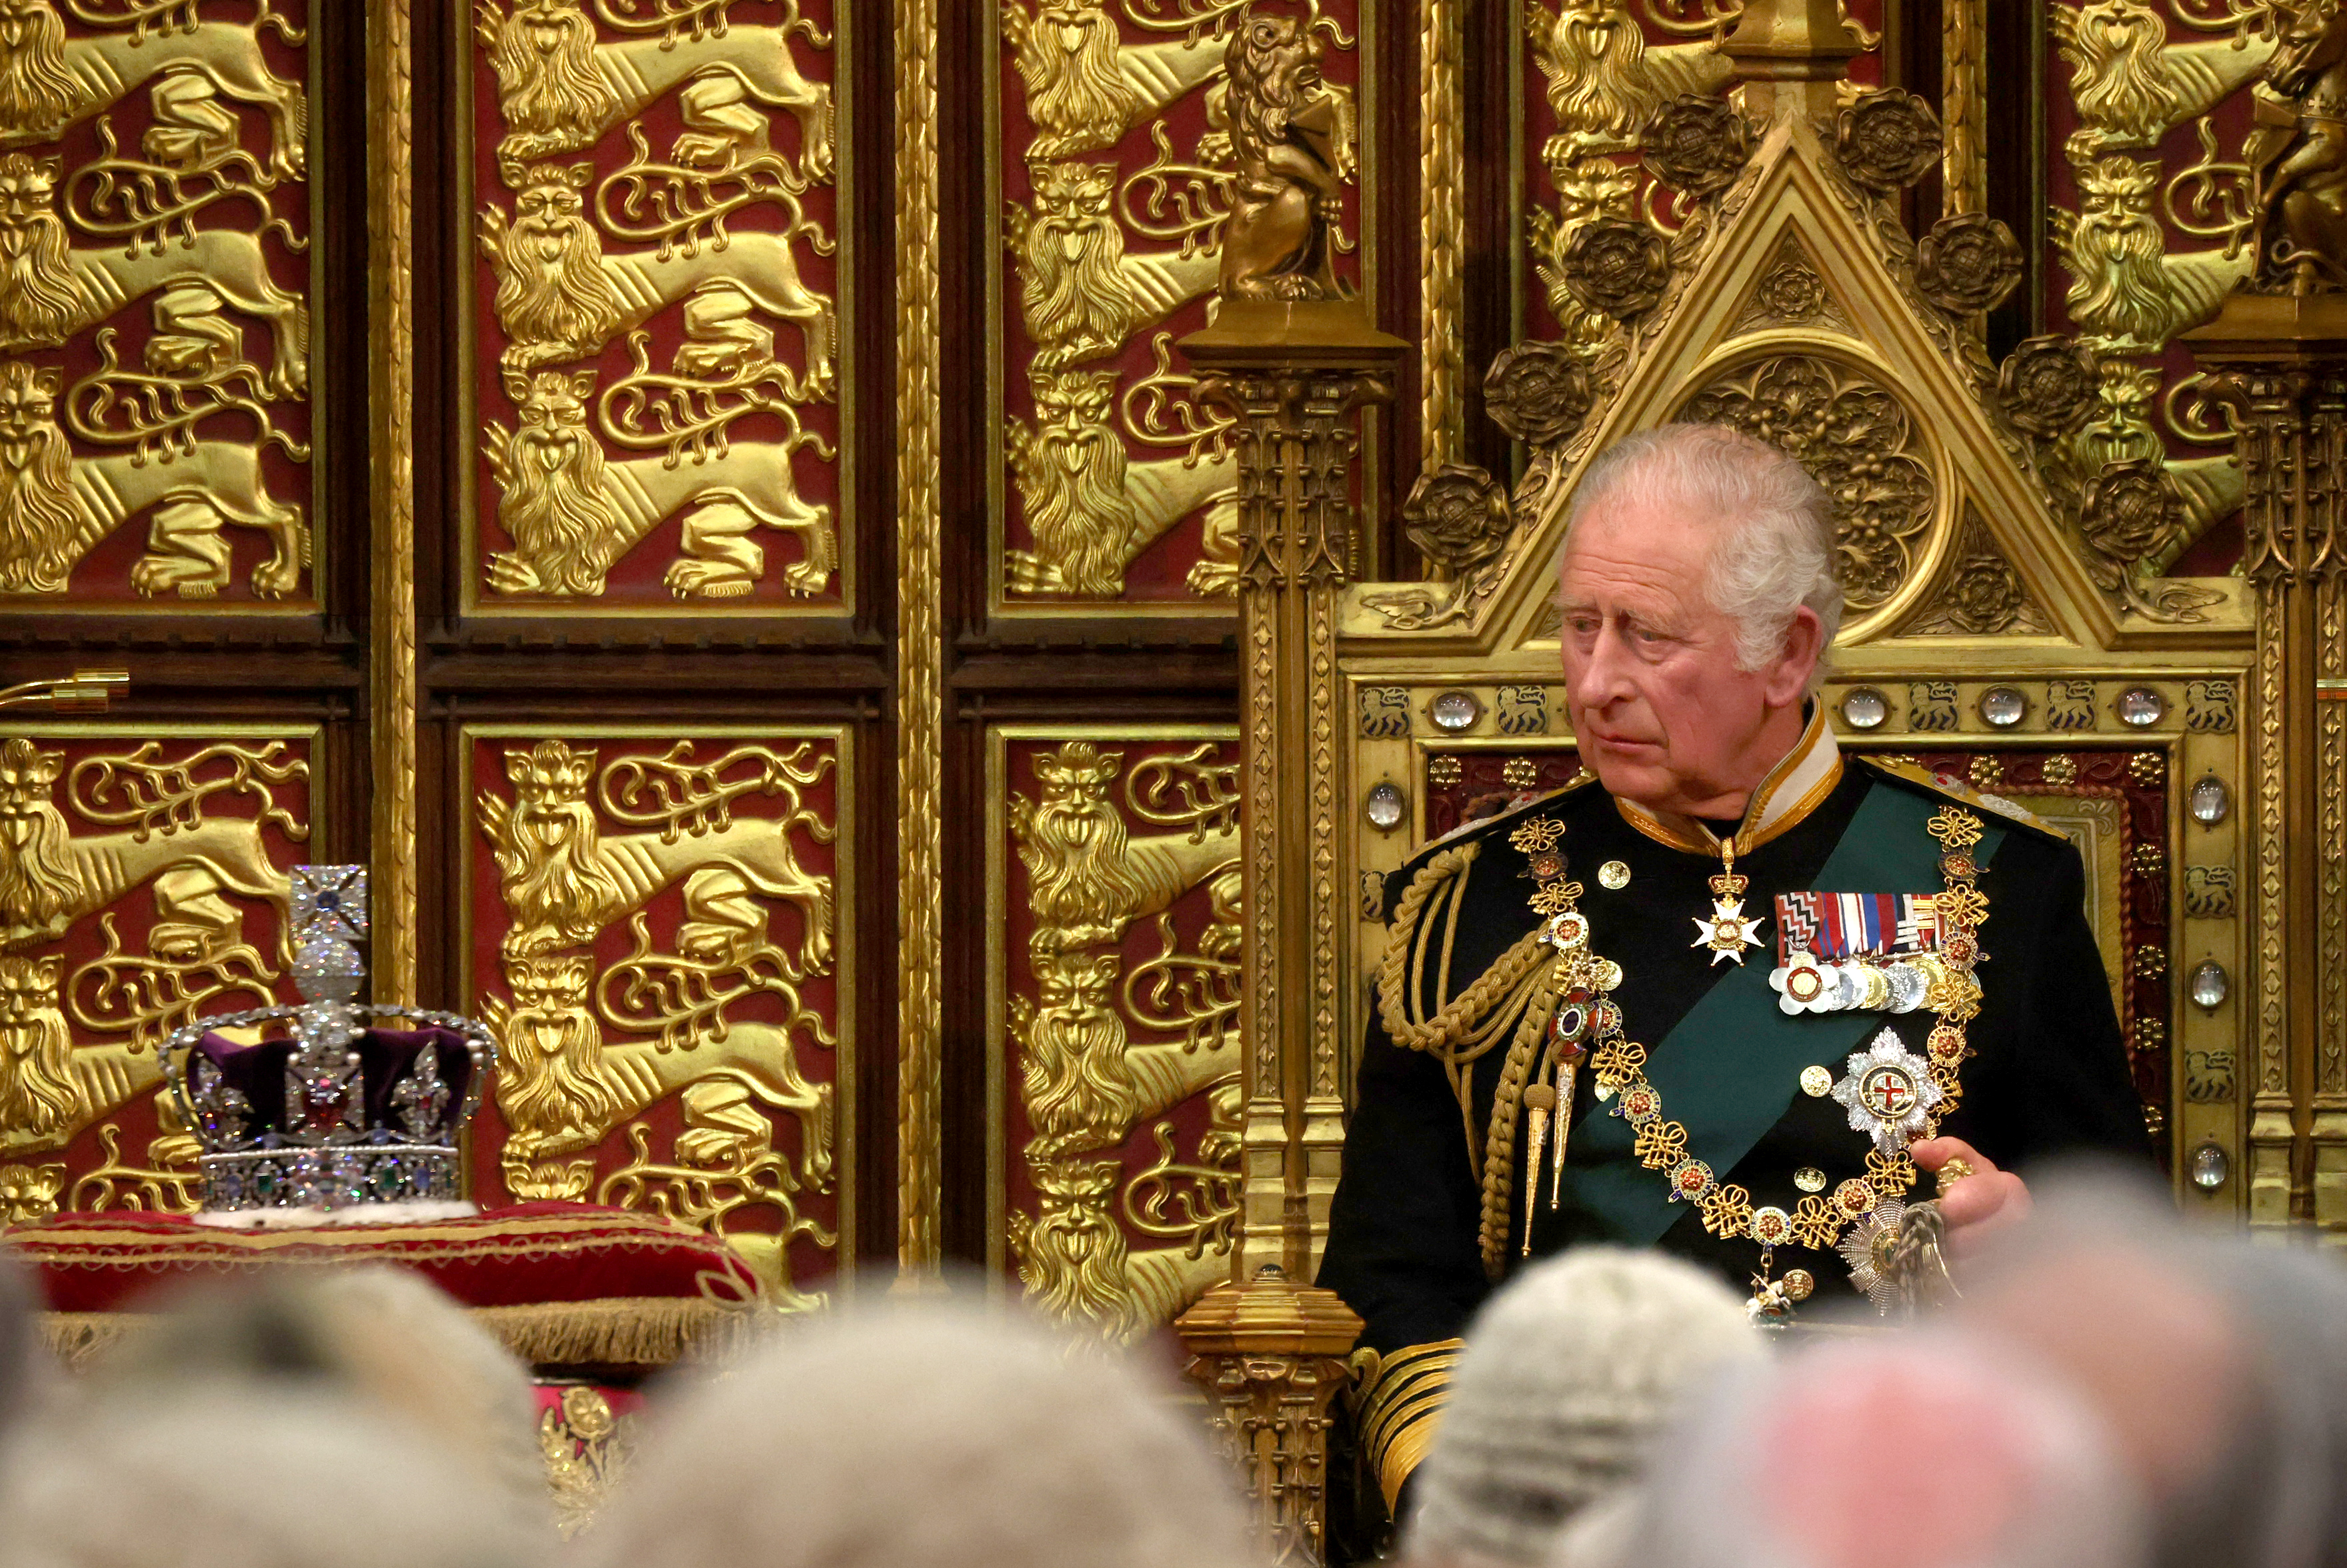 Prince Charles, now the king, reads the Queen’s speech as he sits by the Imperial State Crown in the British Parliament in May 2022. (Photo by Dan Kitwood/Getty Images)